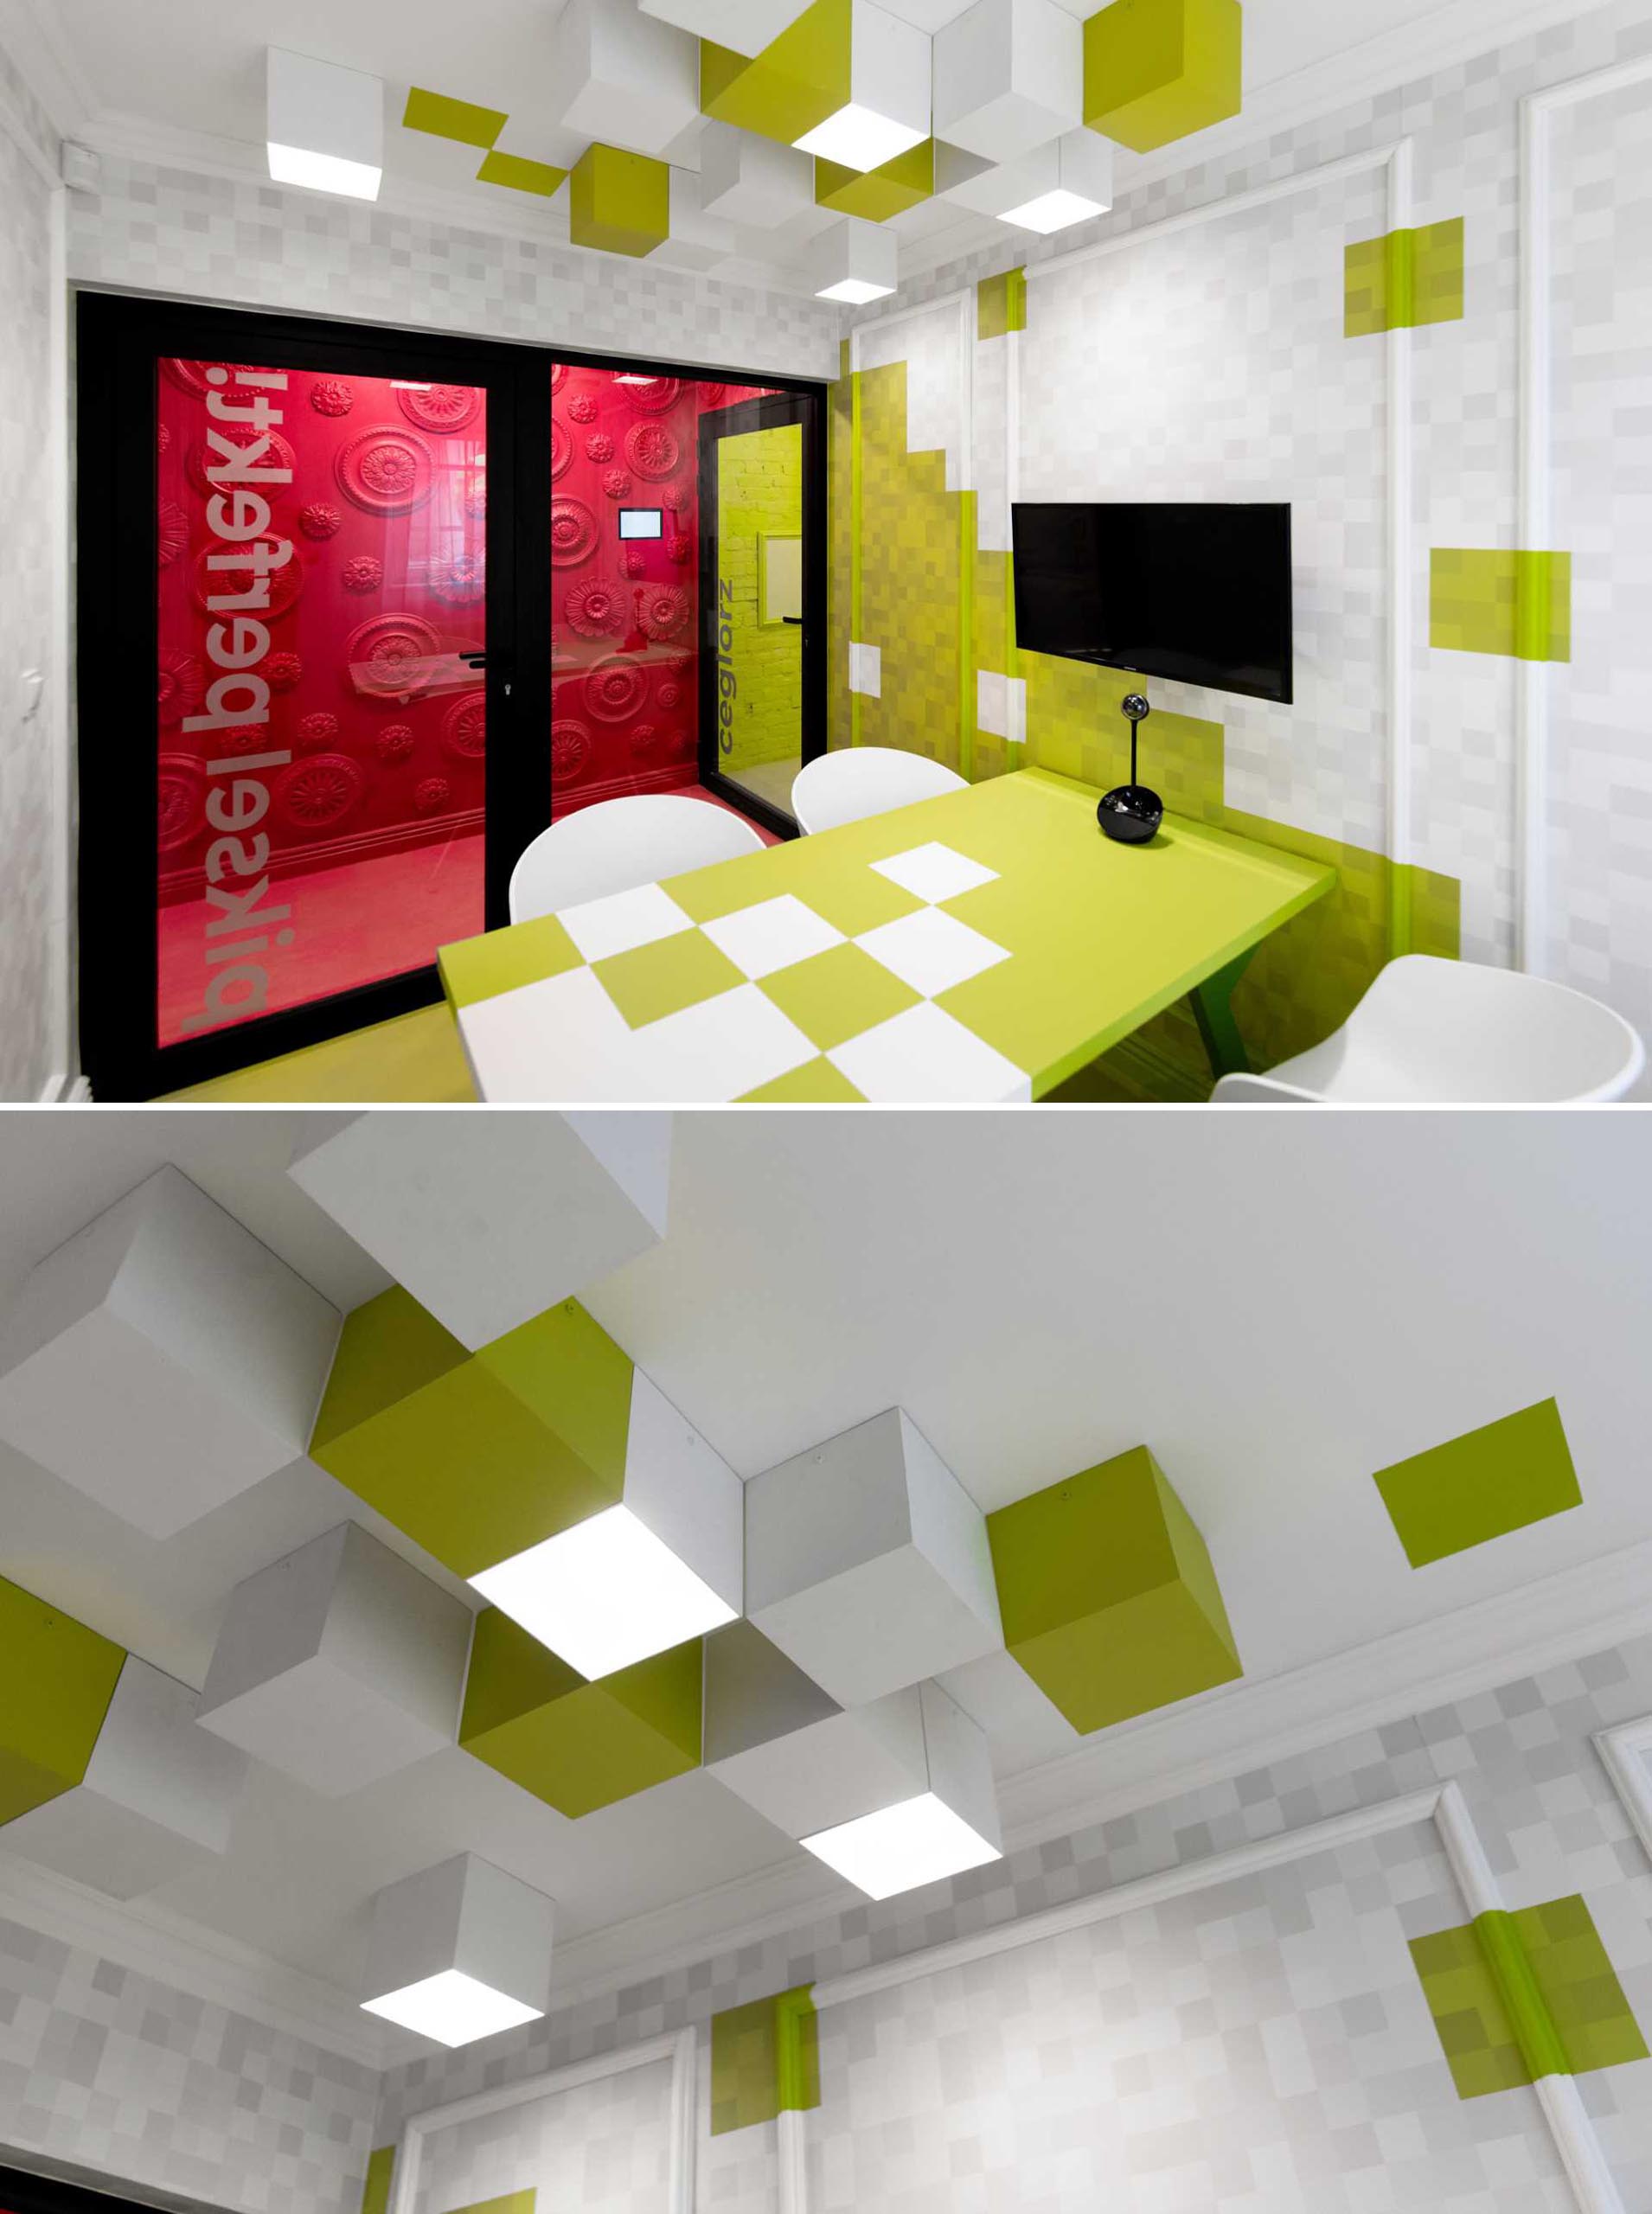 A pixel inspired meeting nroom has green squares on the walls as well as as the ceiling.